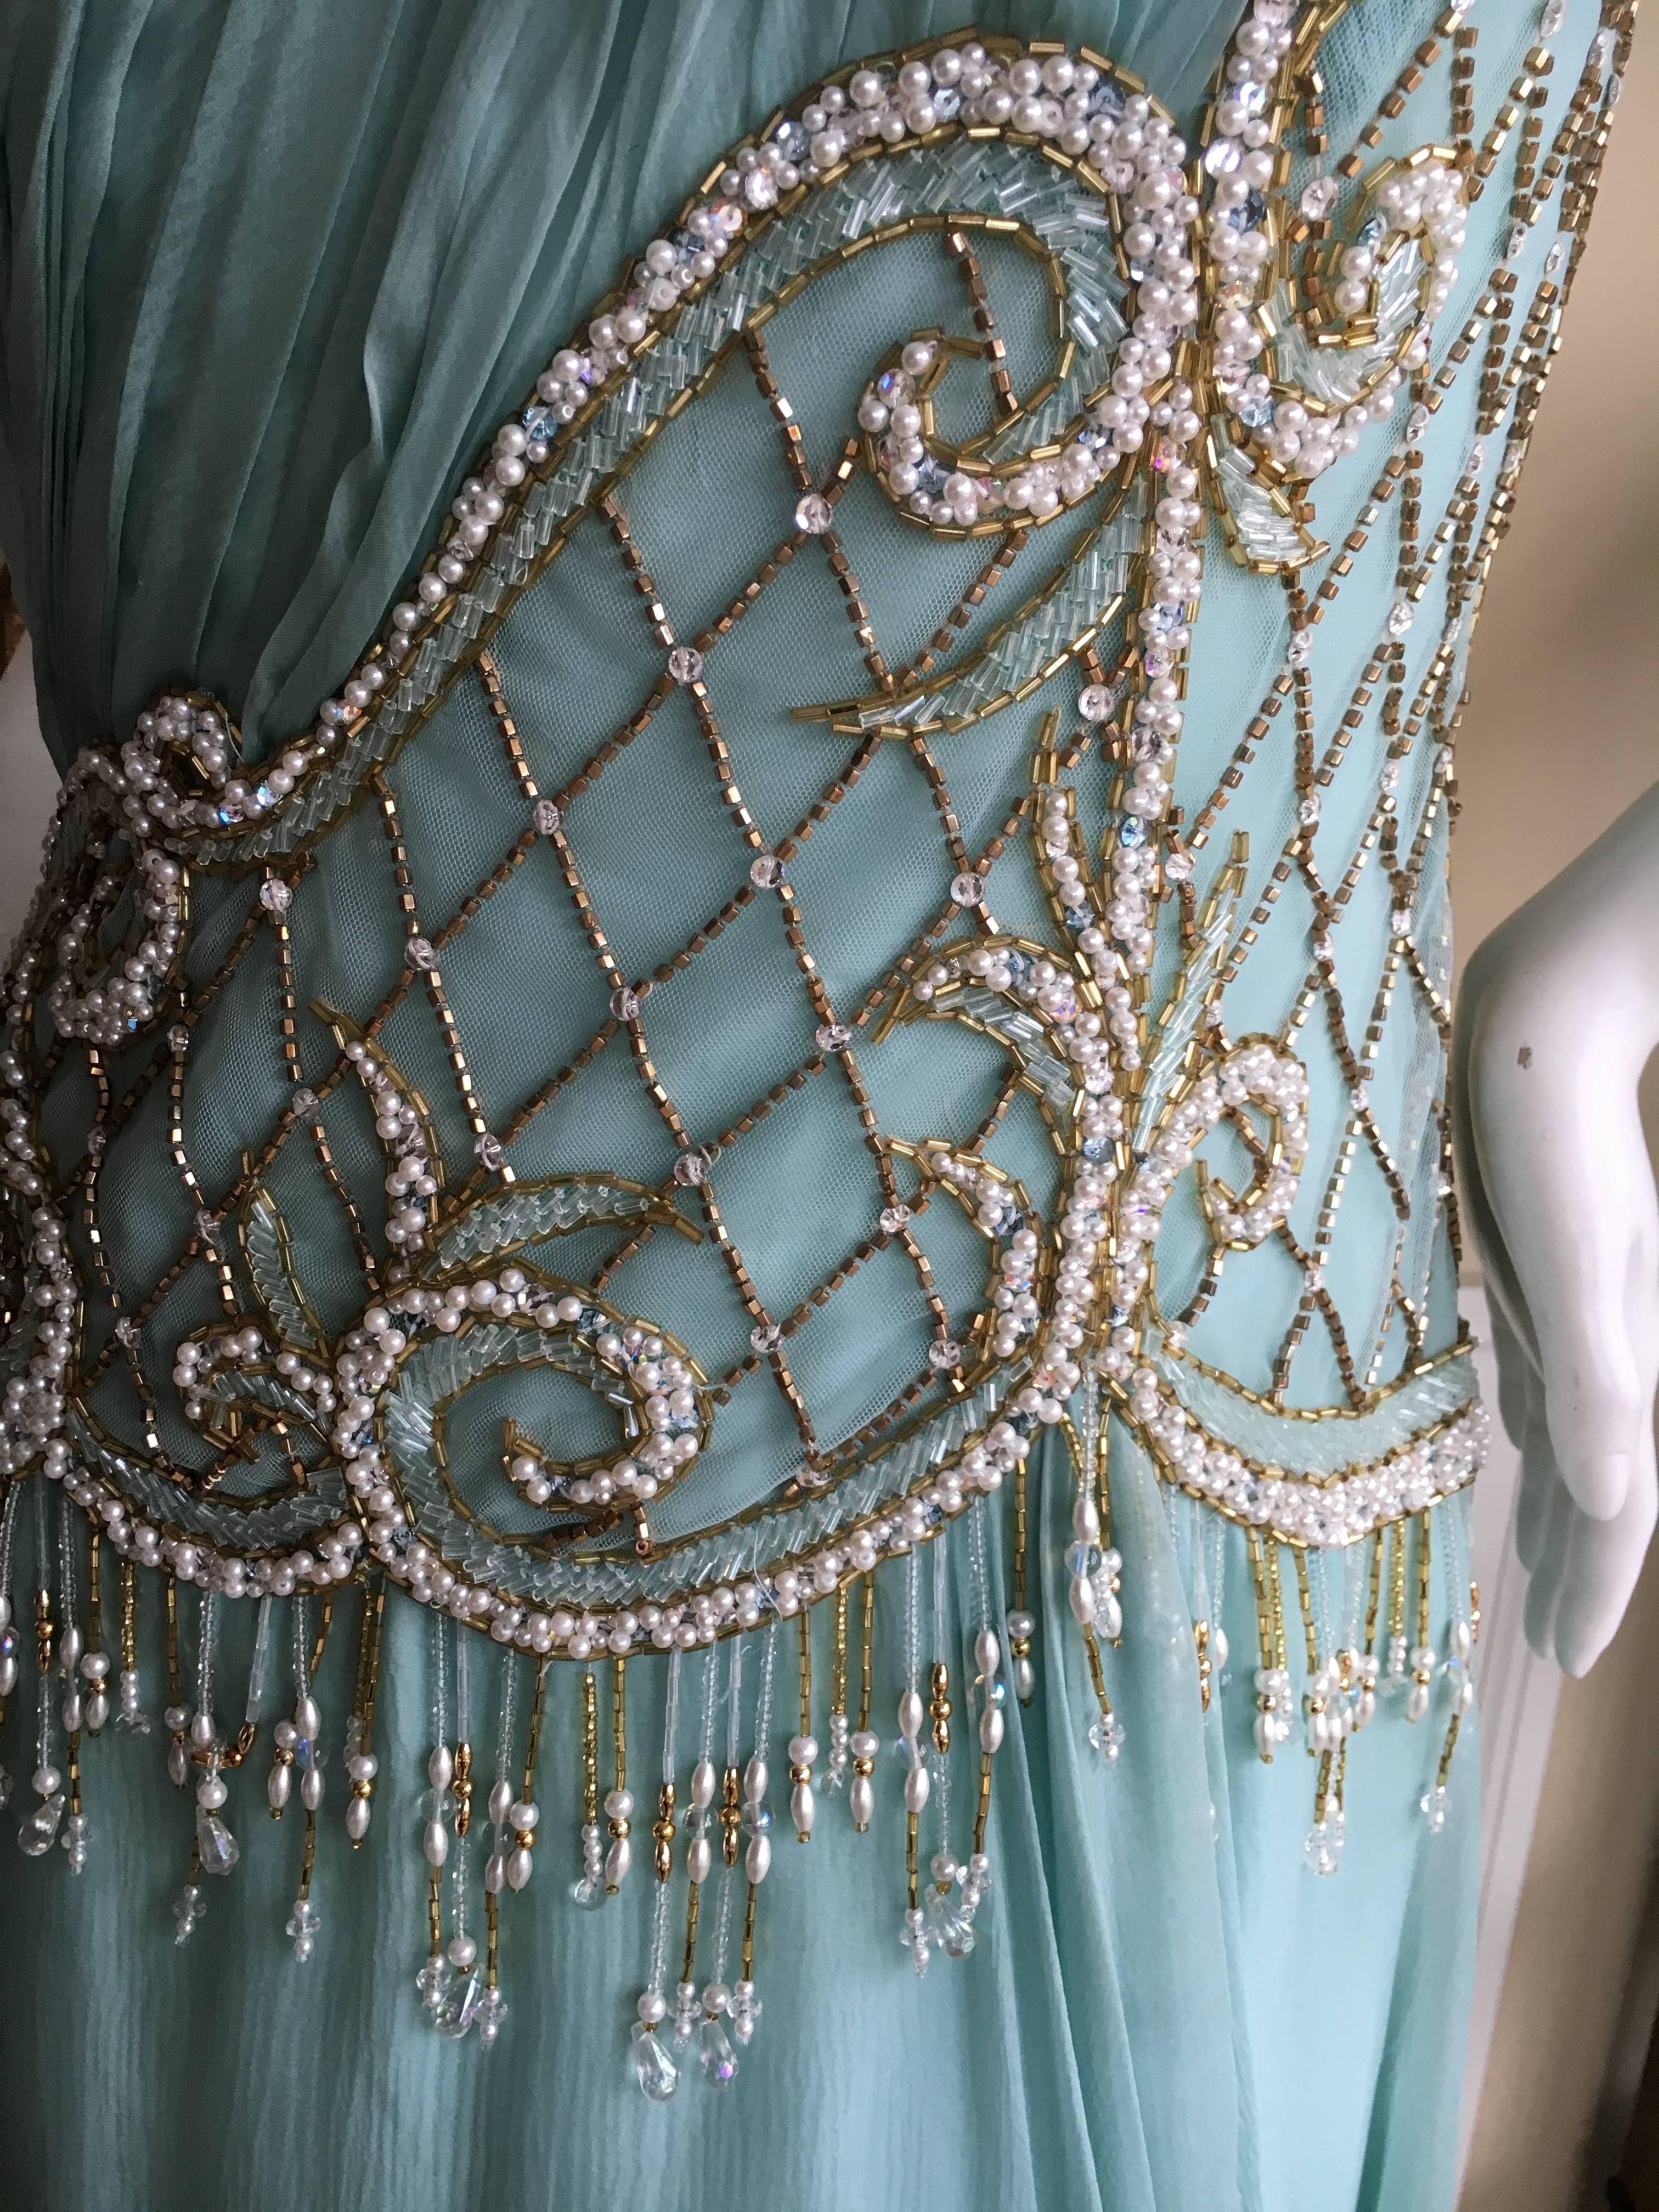 Bob Mackie One Shoulder Turquoise Goddess Gown with Fringe Pearl Embellishment 2